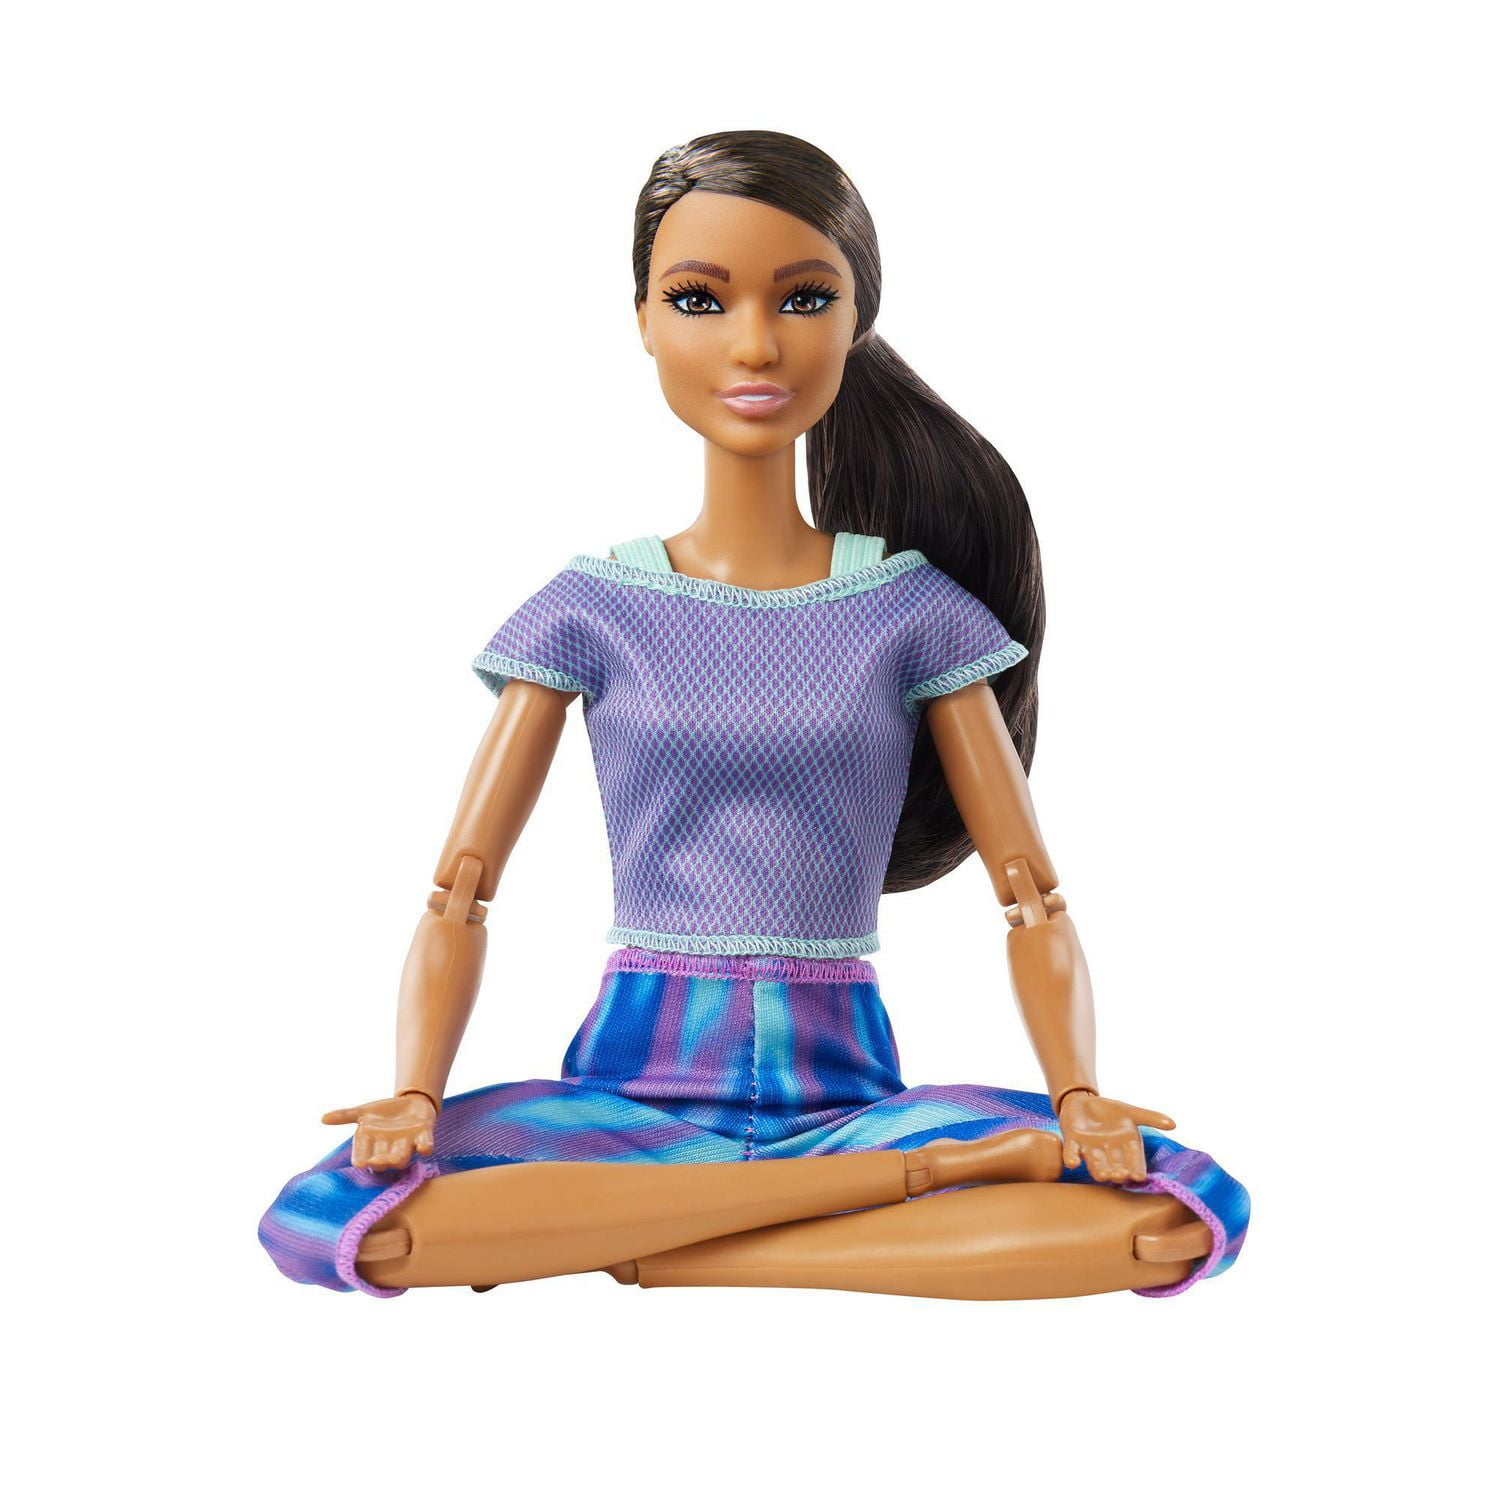 Barbie Made To Move Dolls With 22 Joints And Yoga Clothes, Floral